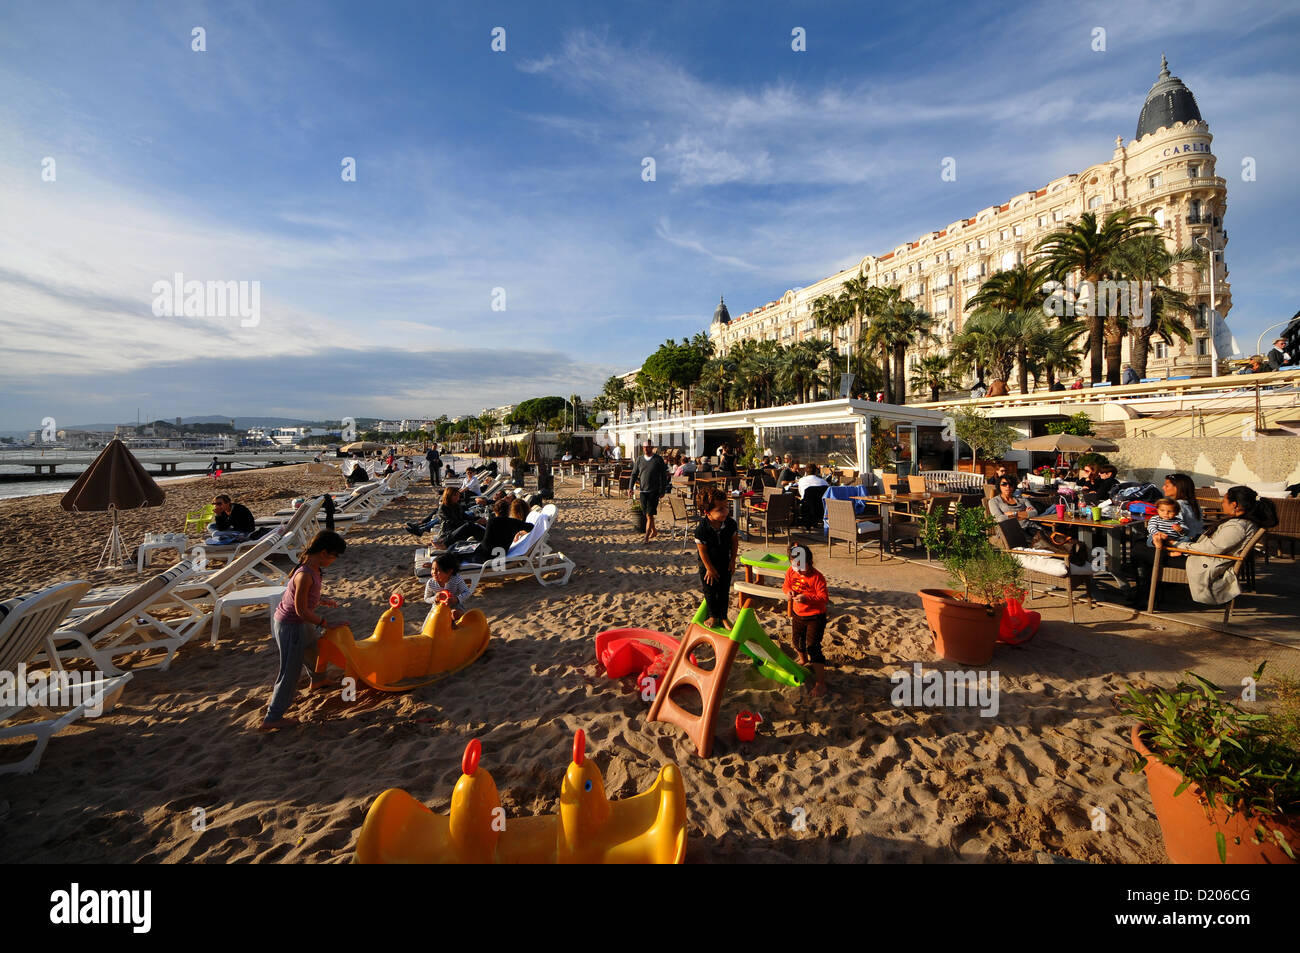 Beach at Carlton hotel at the Croisette, Cannes, Cote d'Azur, South France, Europe Stock Photo